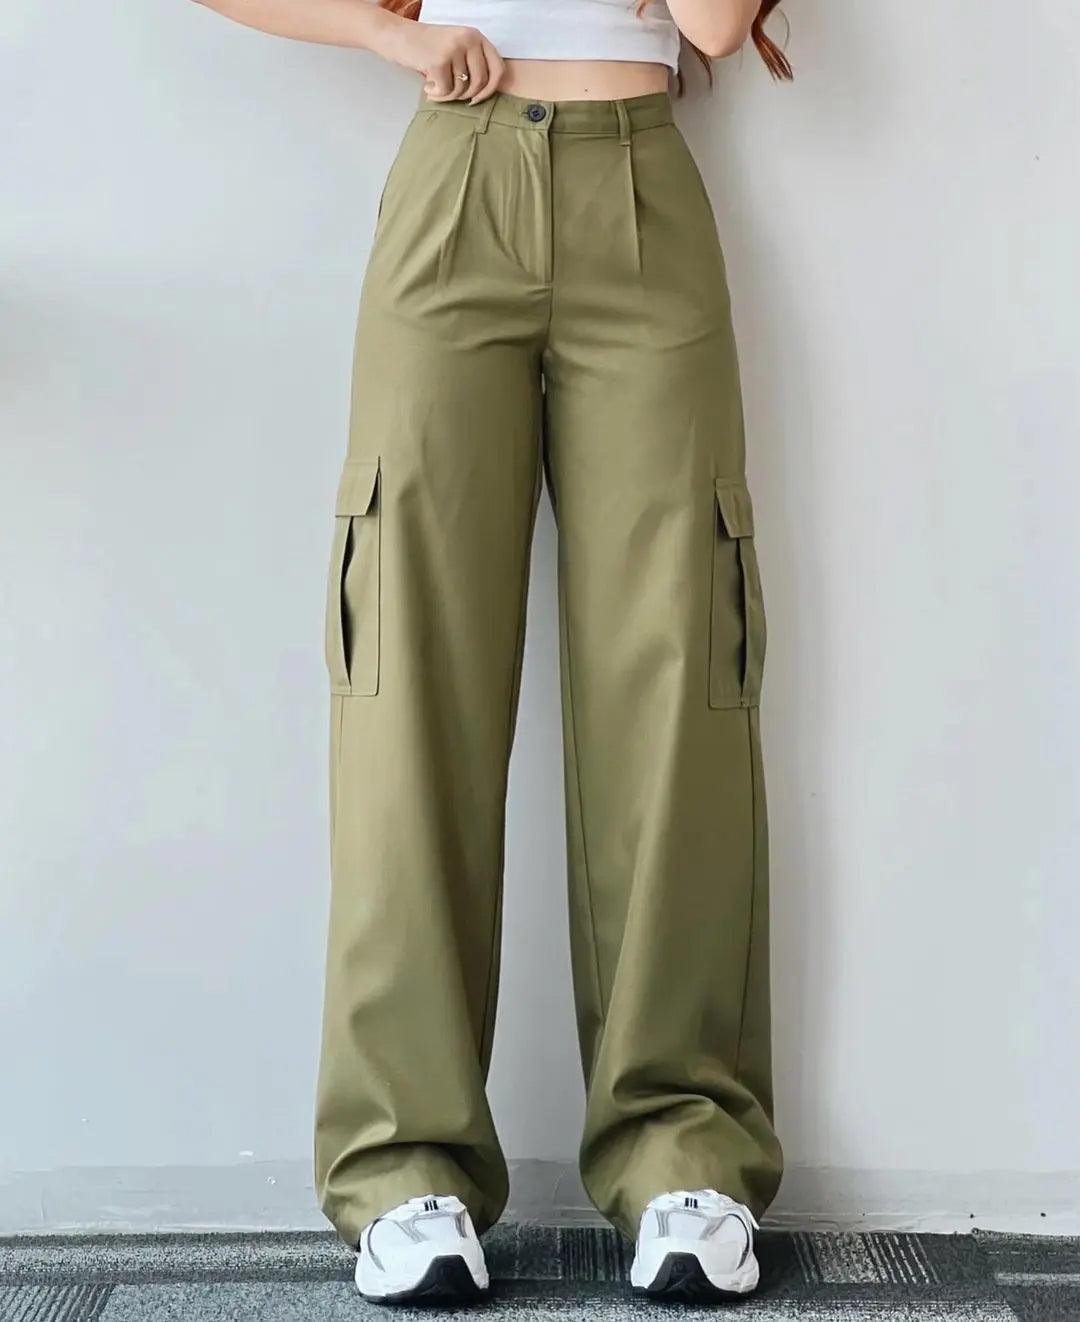 Versatile Vogue Pocketed Pants - itsshirty